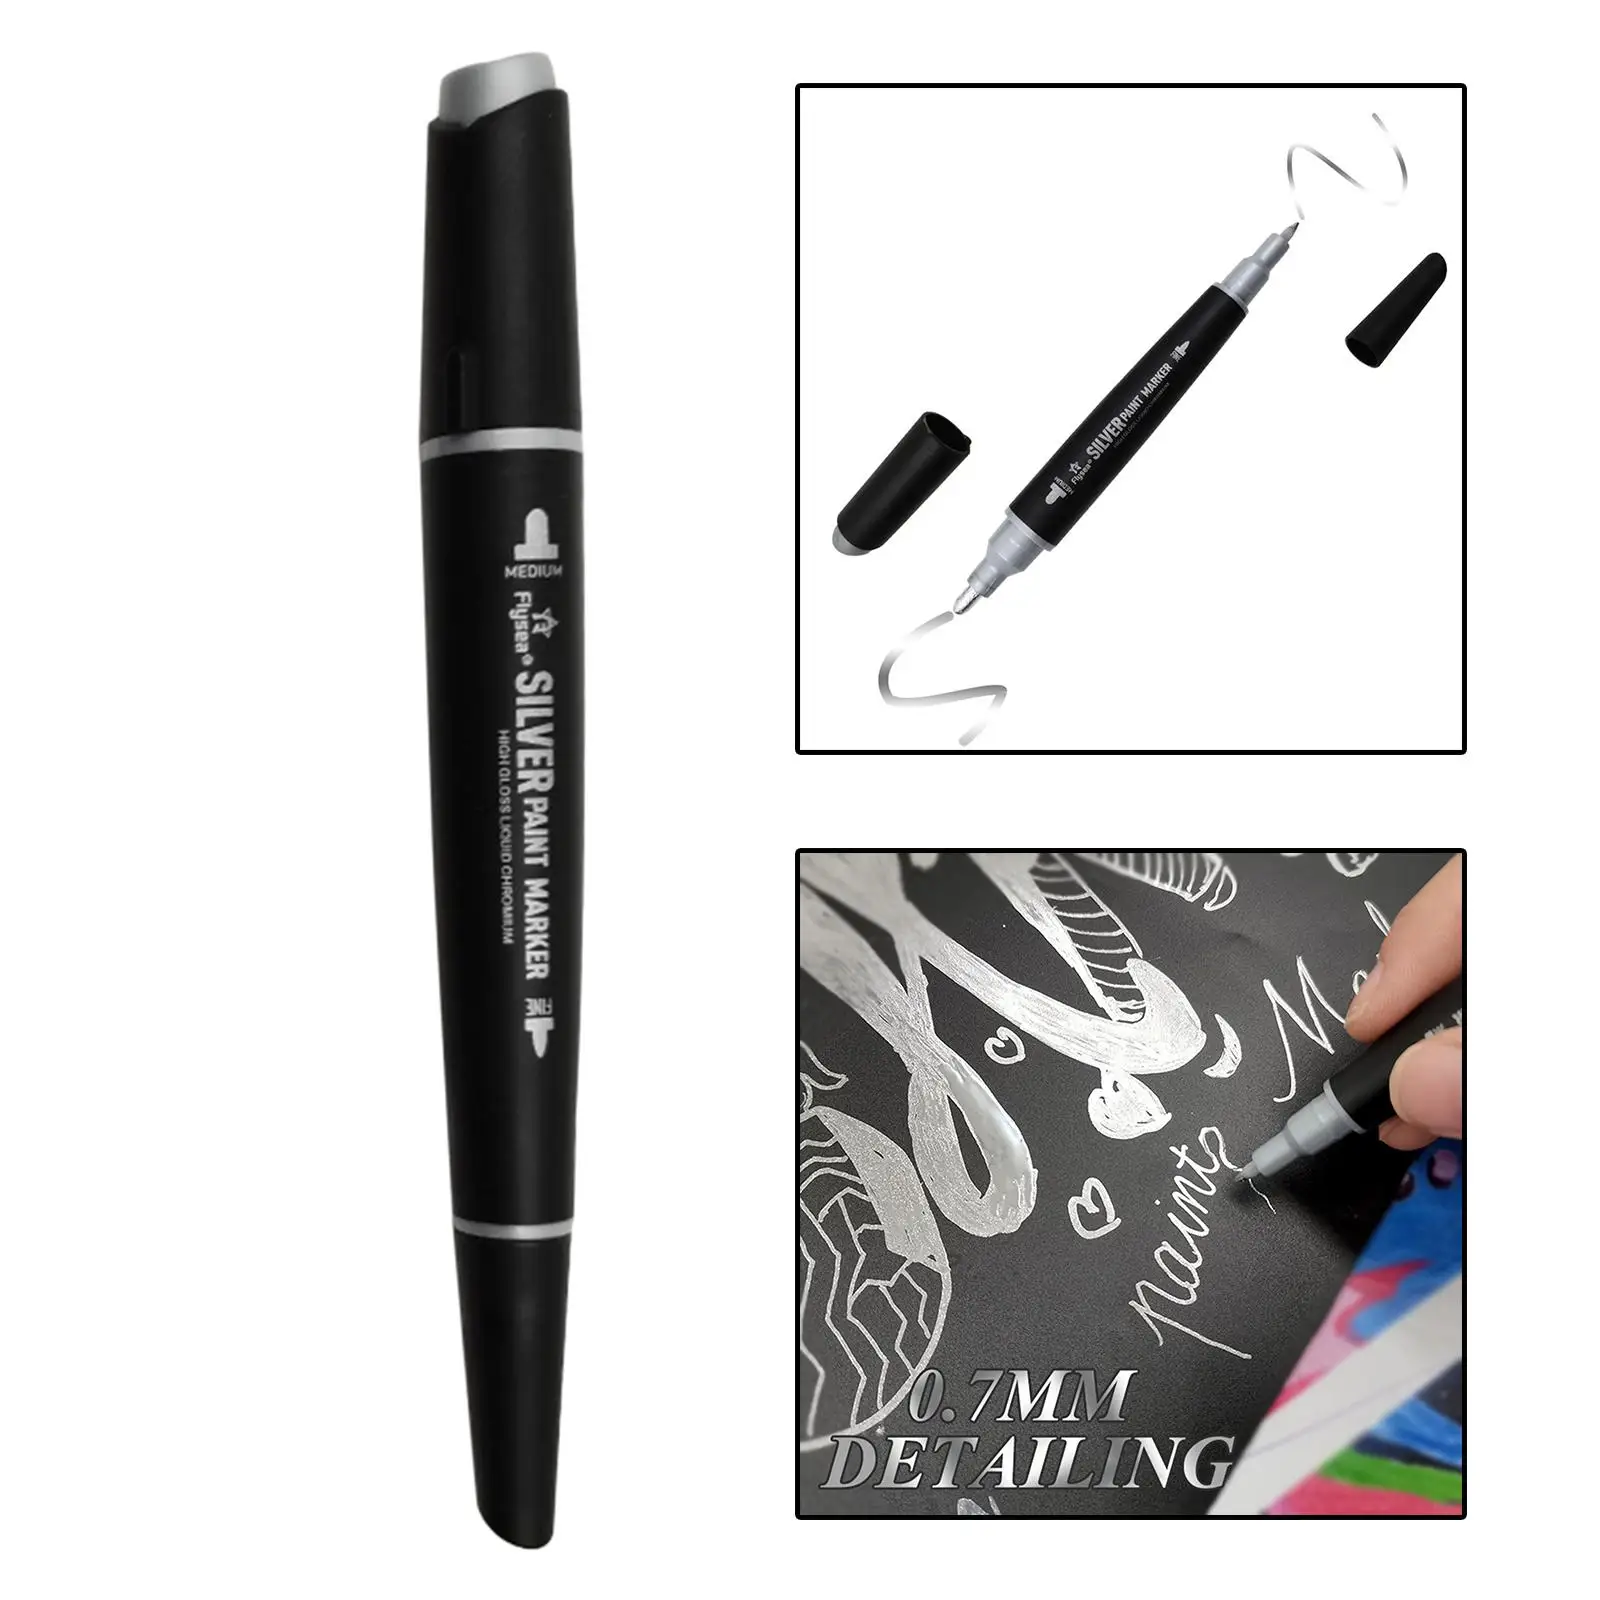  Marker Art Supplies 3mm 0.7mm Chrome Marker Pen with Mirror Effect DIY Pump Marker for Fabric Any Surface Glass 